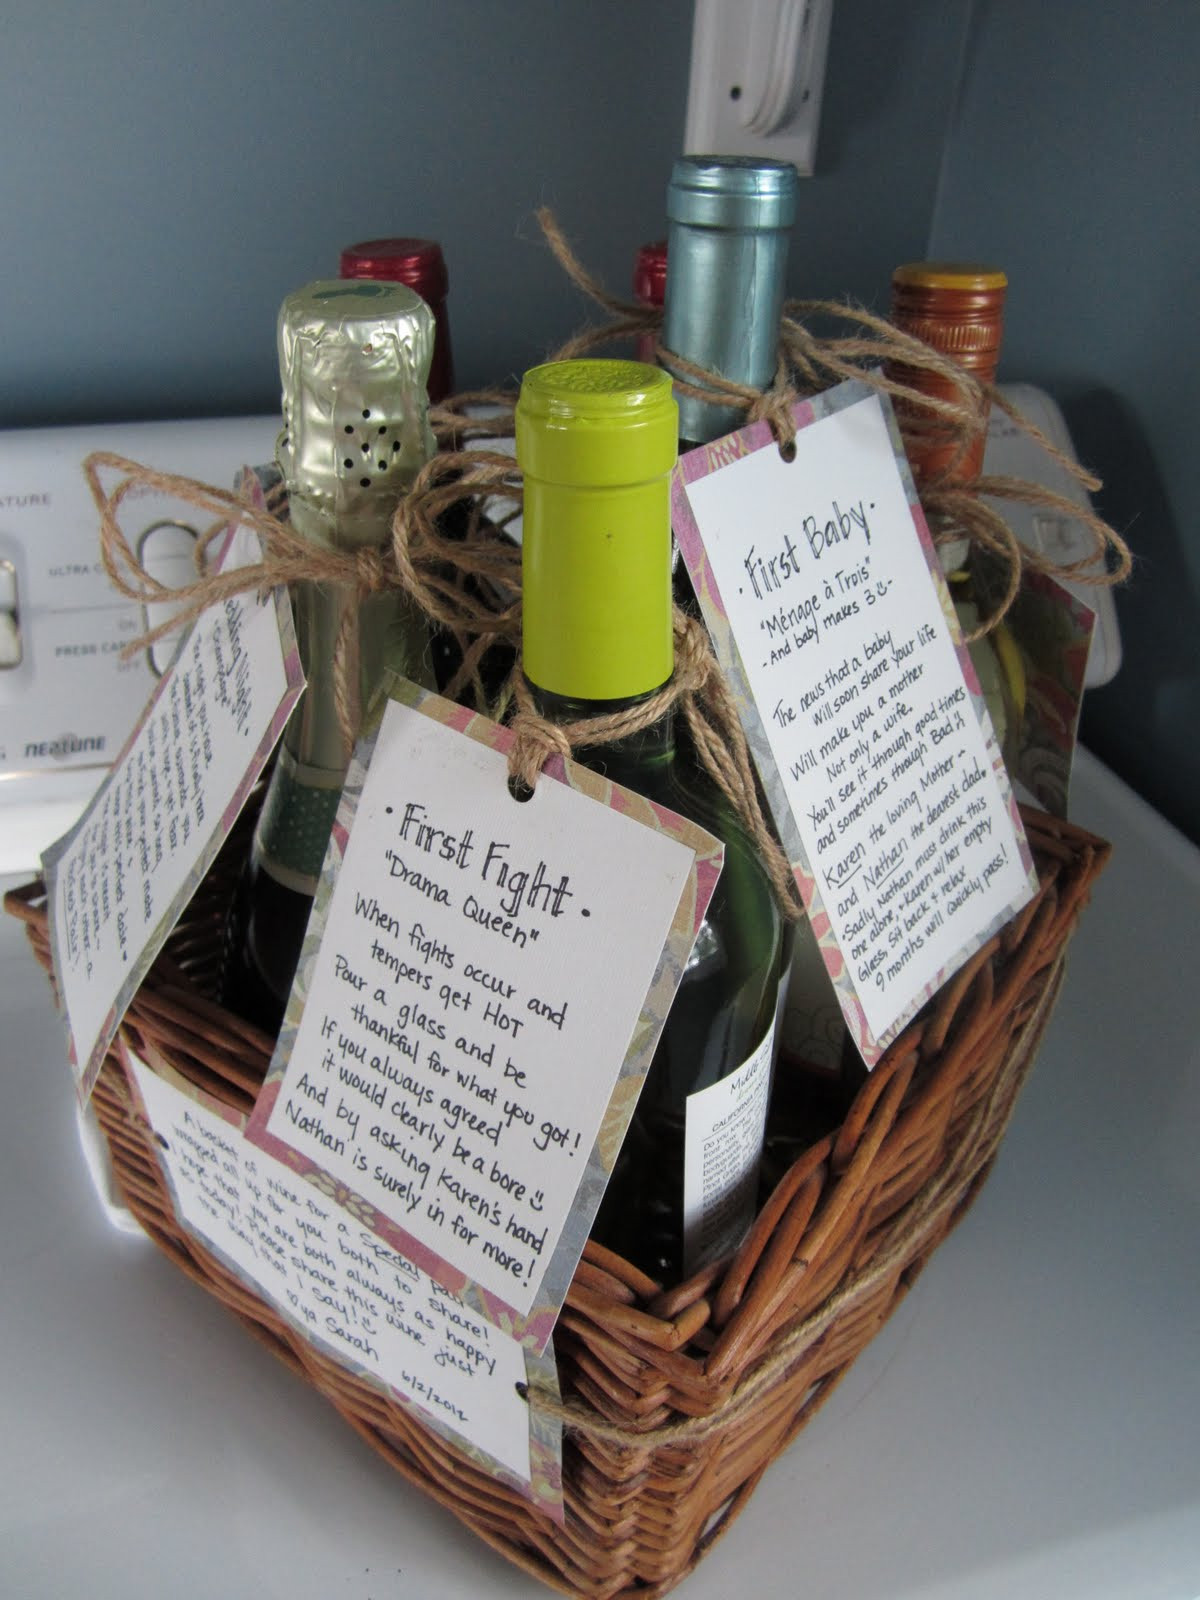 Ideas For A Wedding Gift
 5 Thoughtful Wedding Shower Gifts that Might Not Be on the